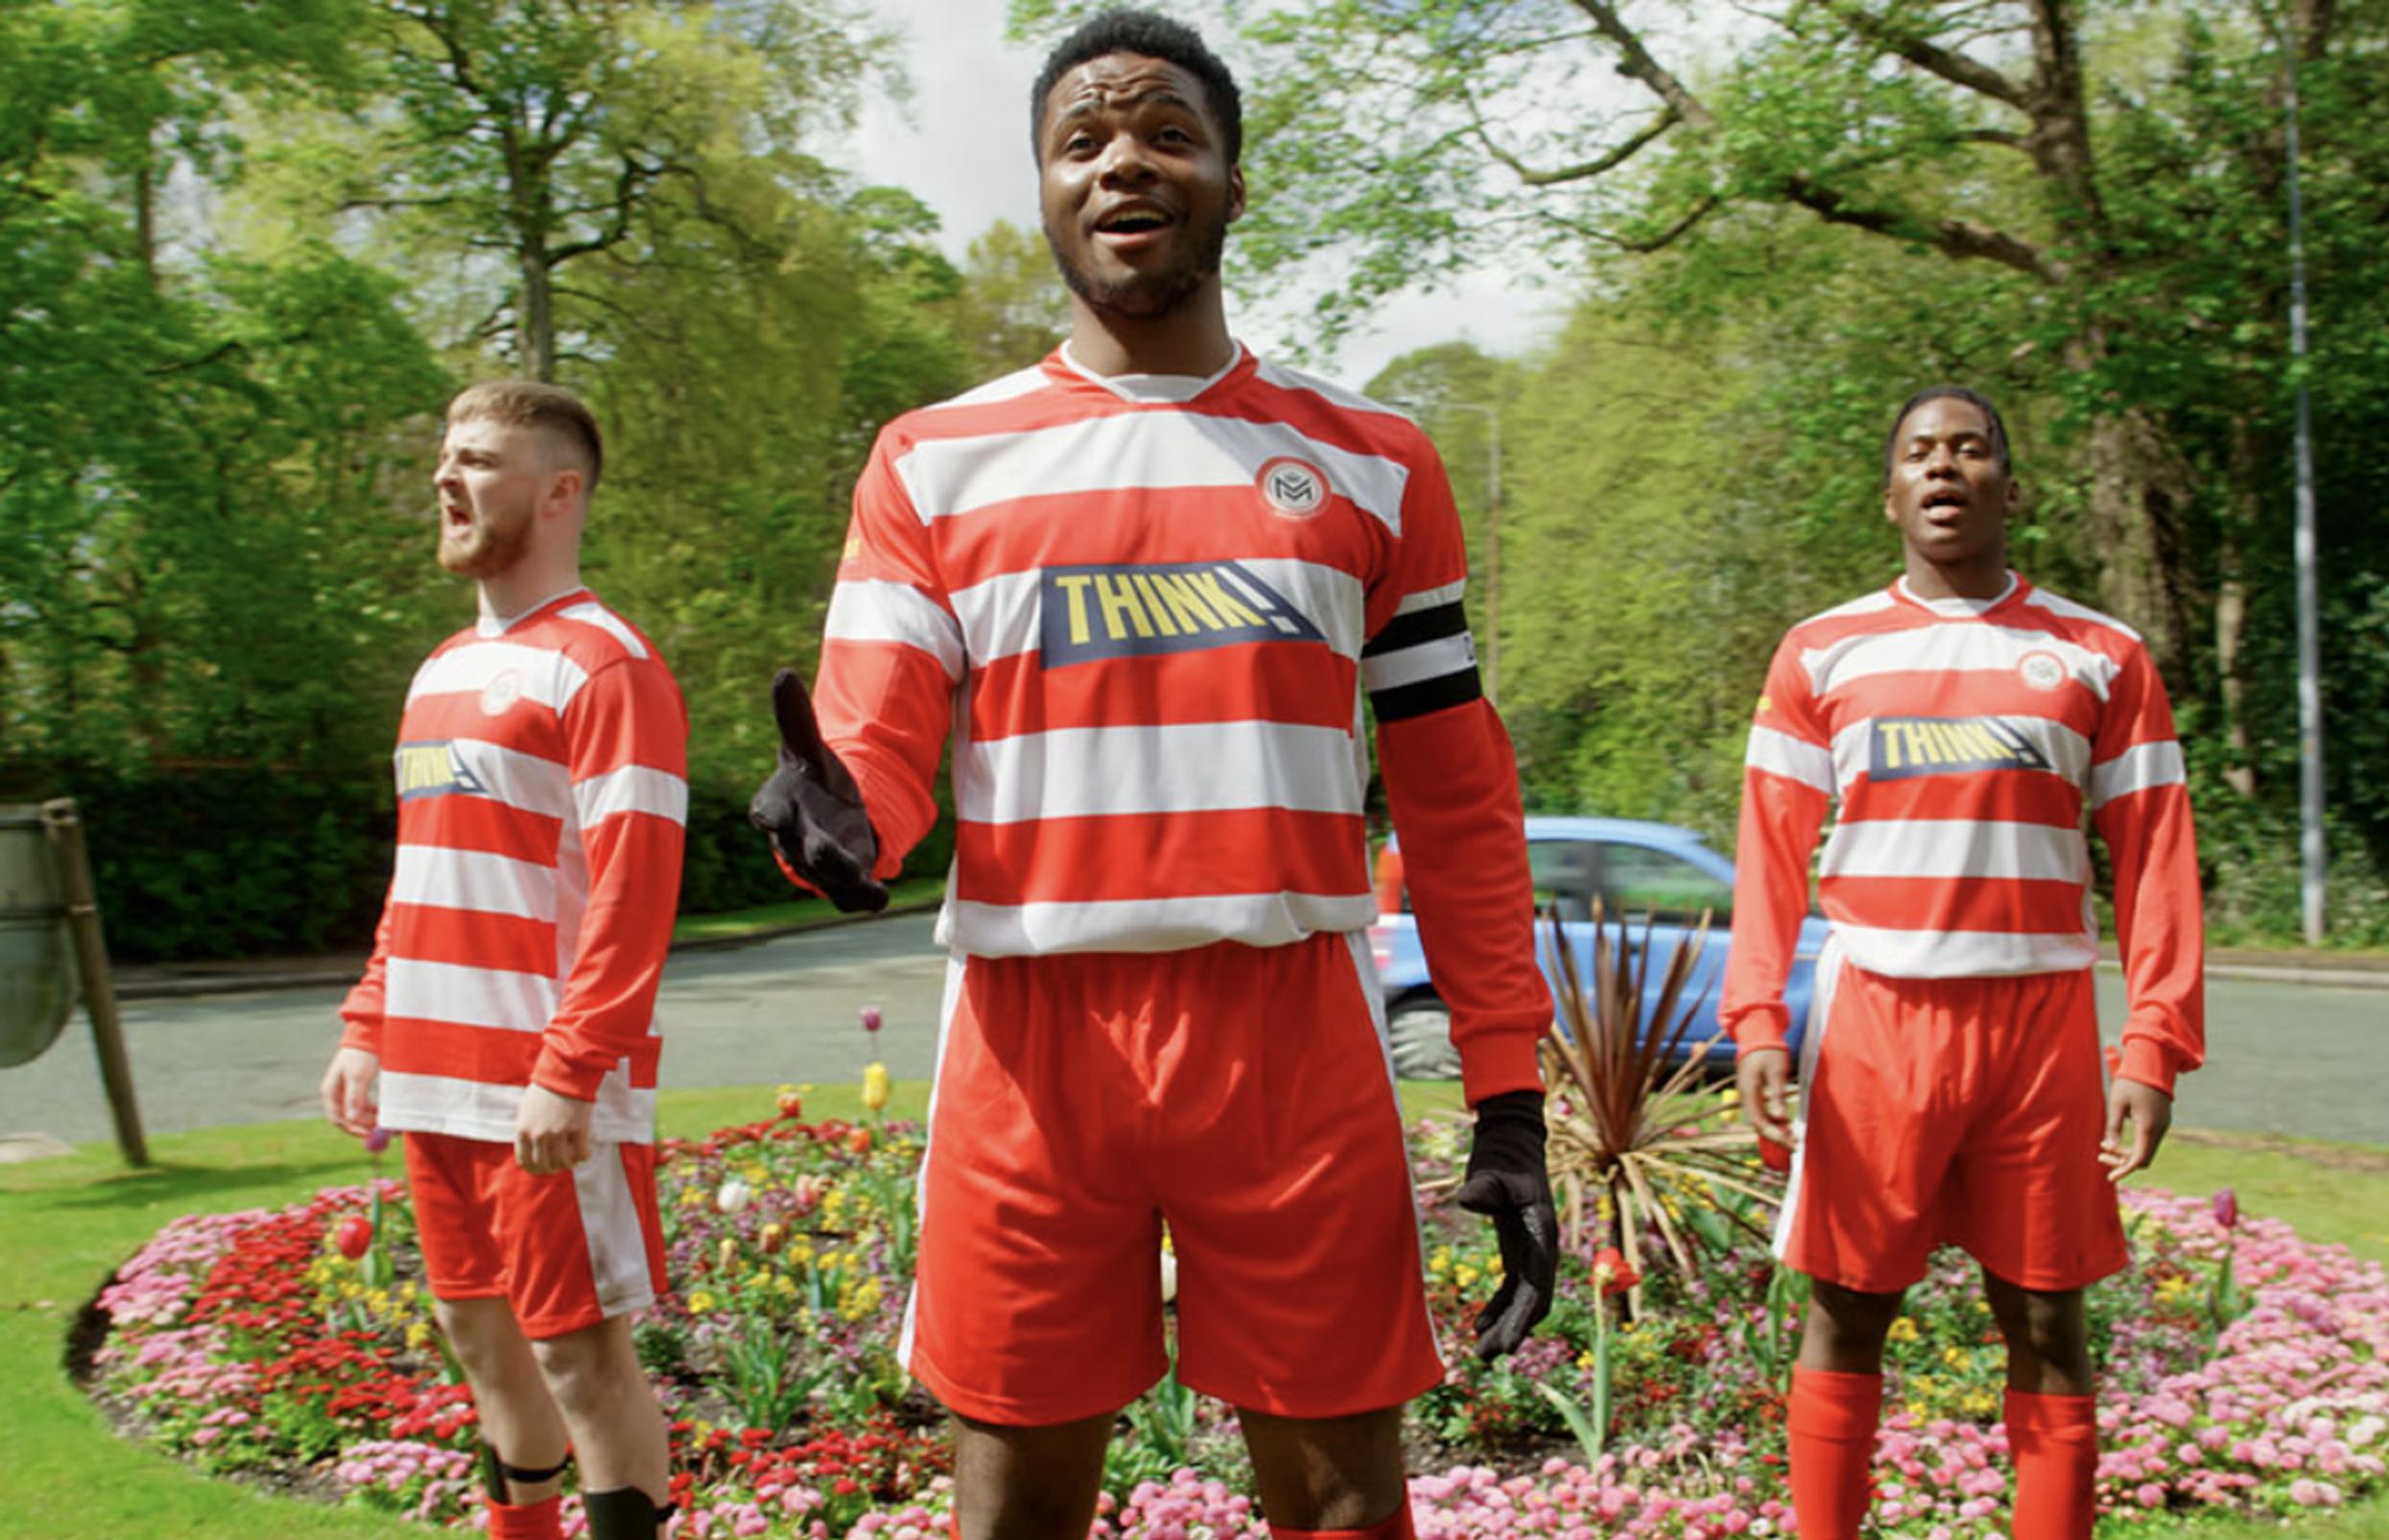 The THINK! advert features football clubs from ariound the country